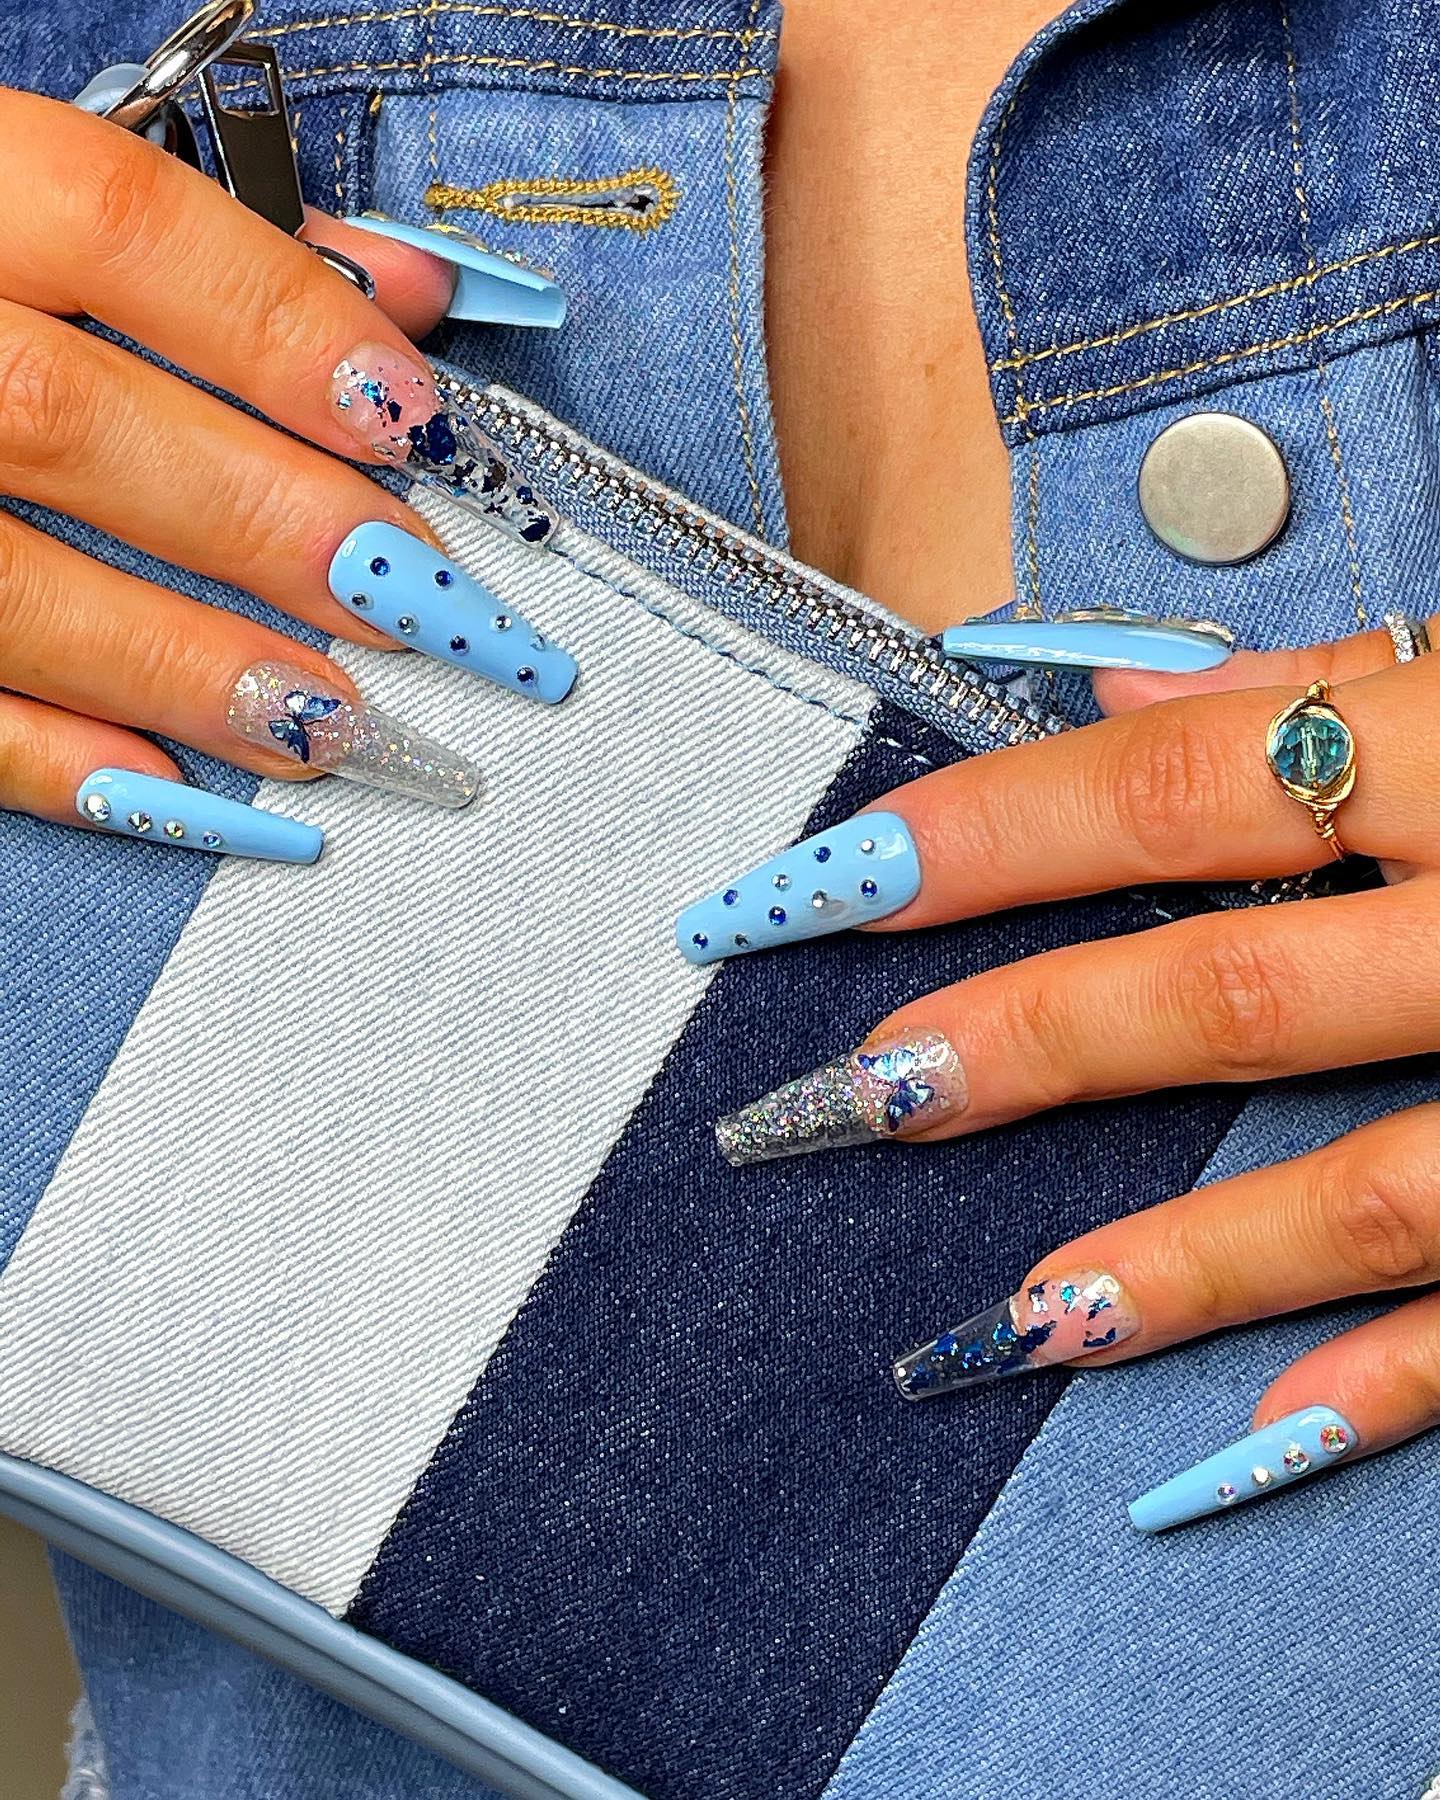 blue coffin nails